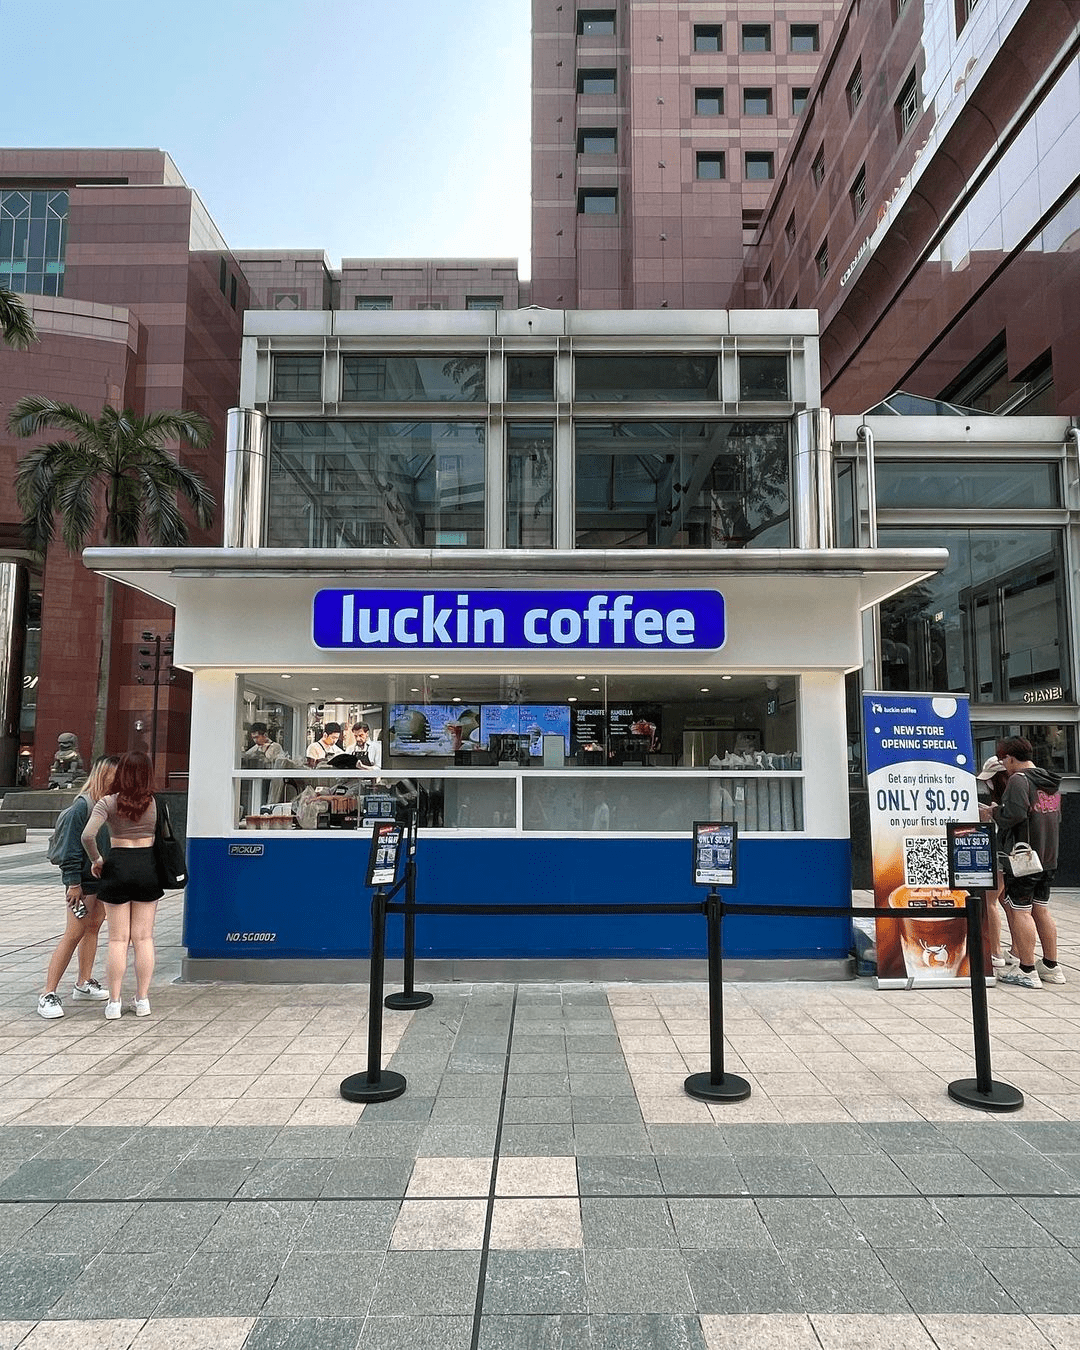 May New Cafe and Restaurants - Luckin Coffee Kiosk